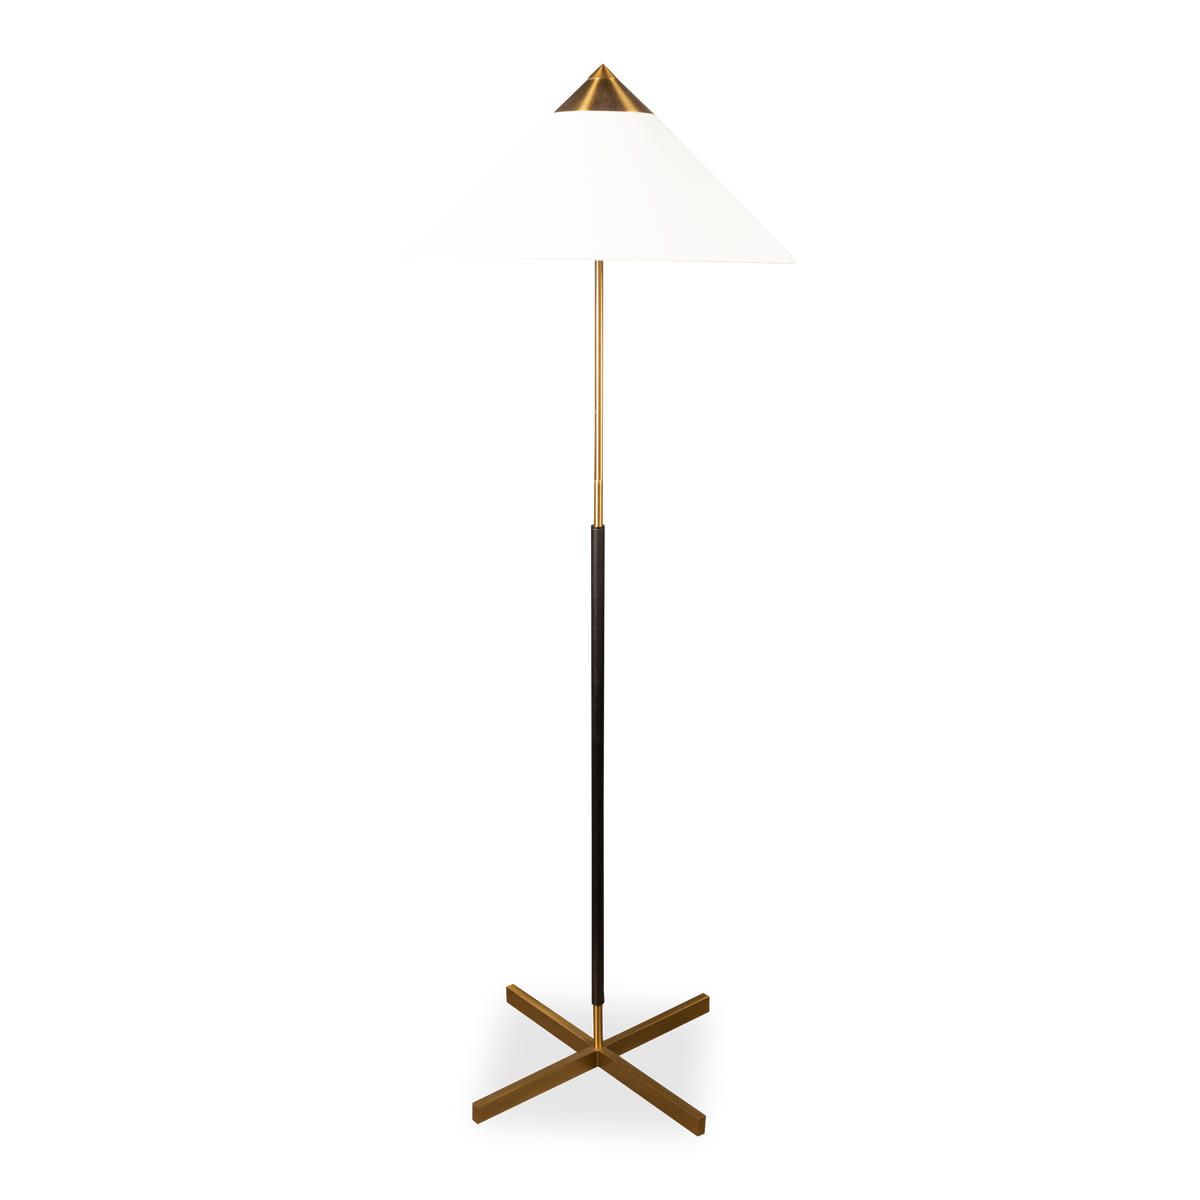 The Franklin Floor Lamp features a white linen shade with a brass and bronze finish.